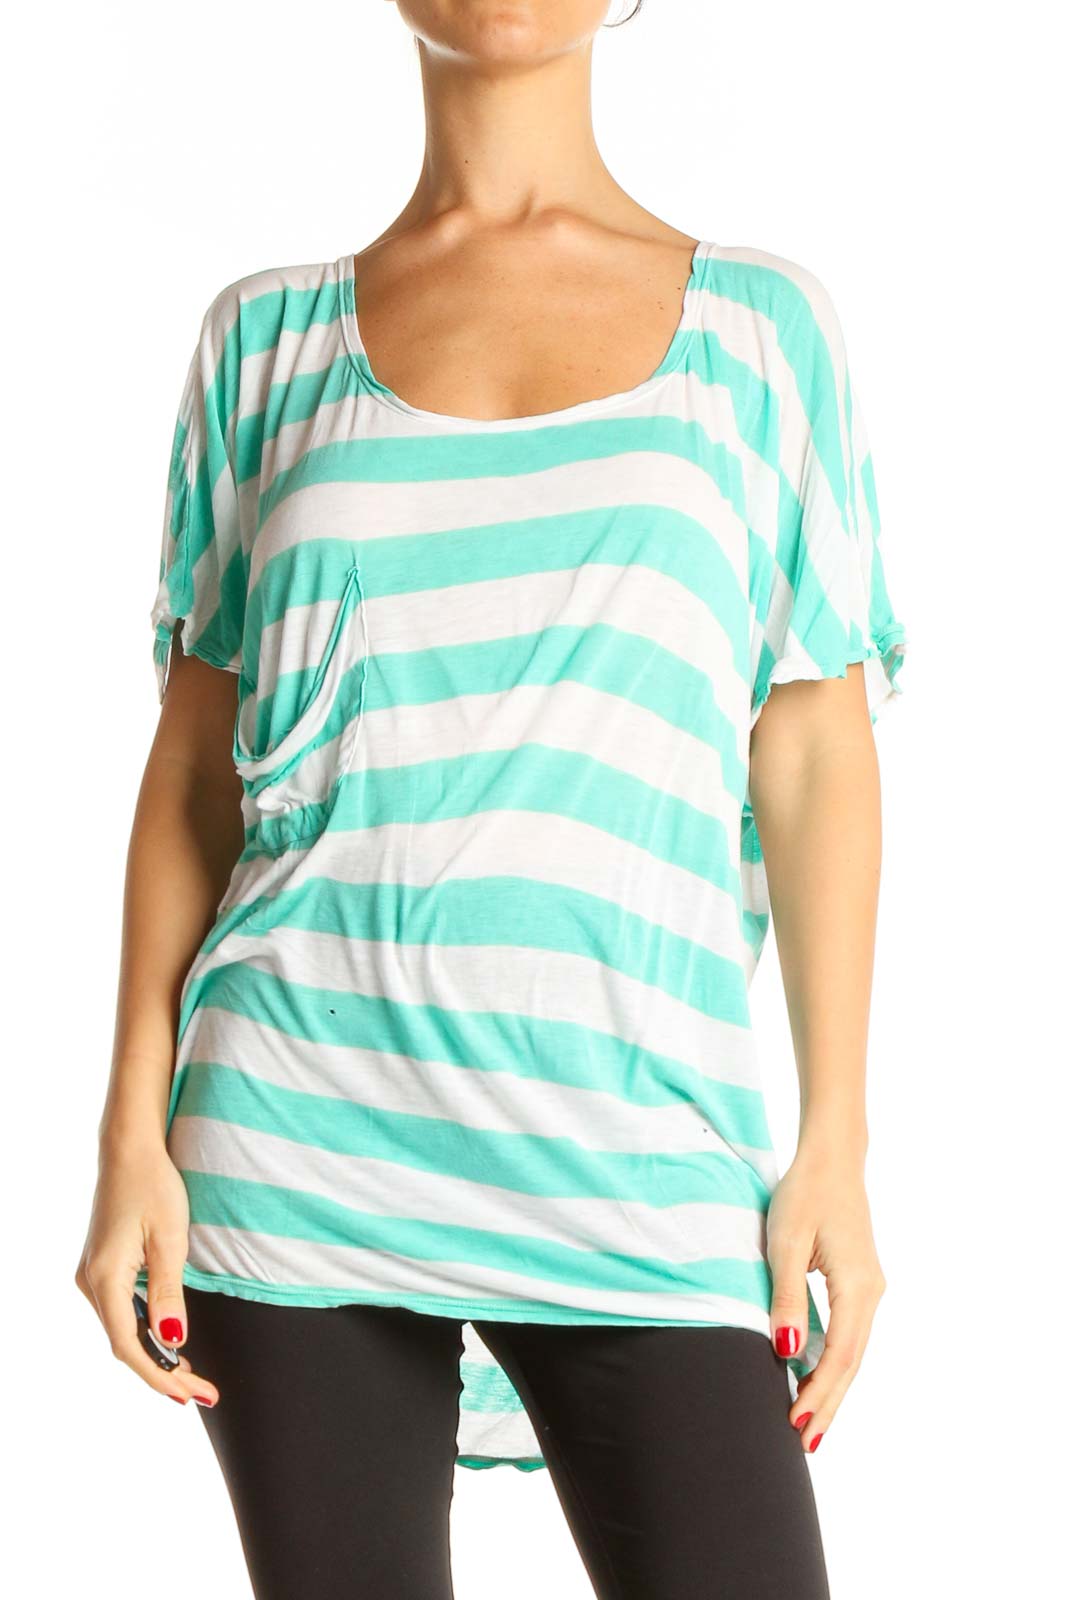 Blue Striped Casual Top Front